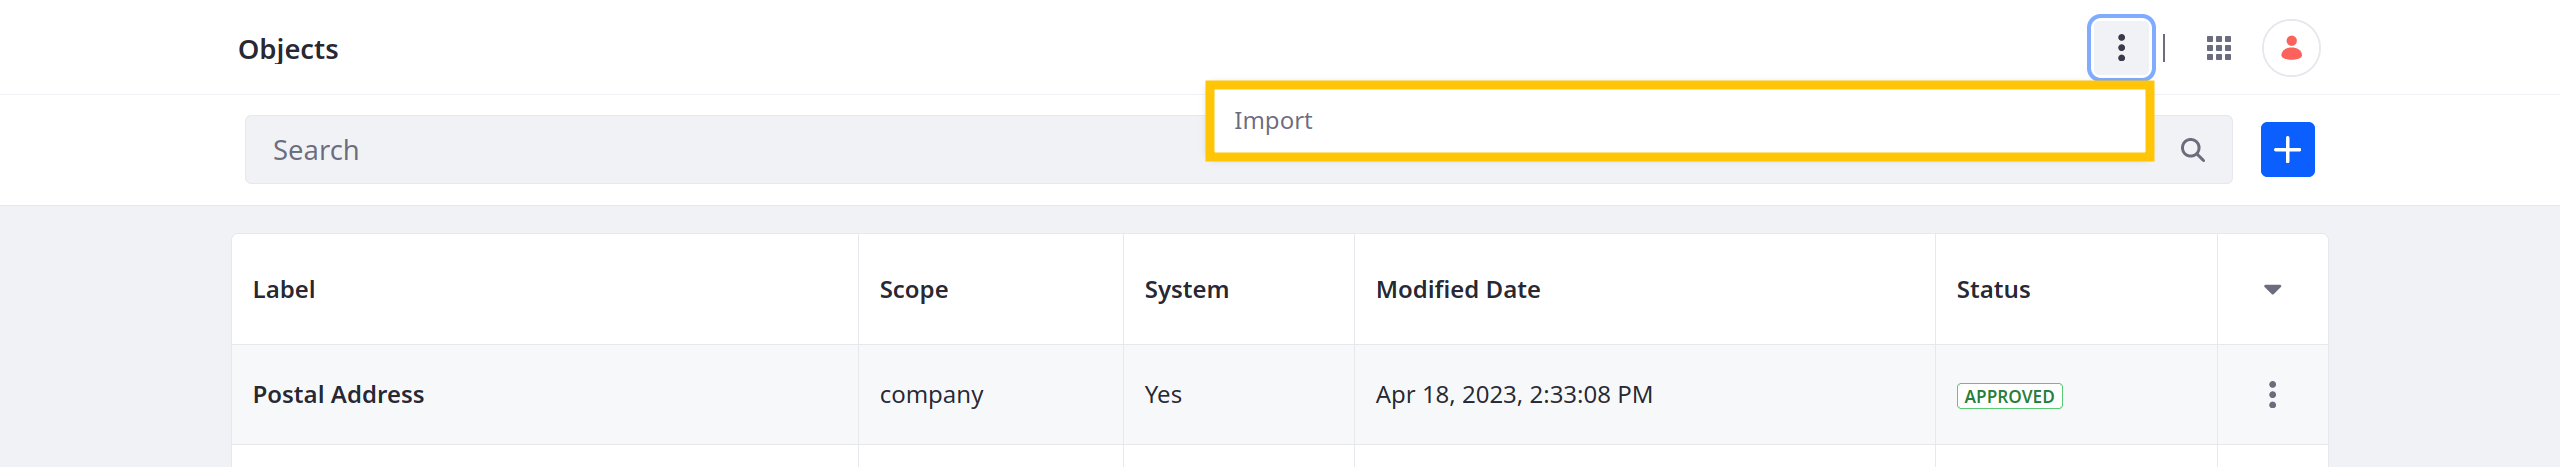 Click the Actions button in the Application Bar and select Import Object.